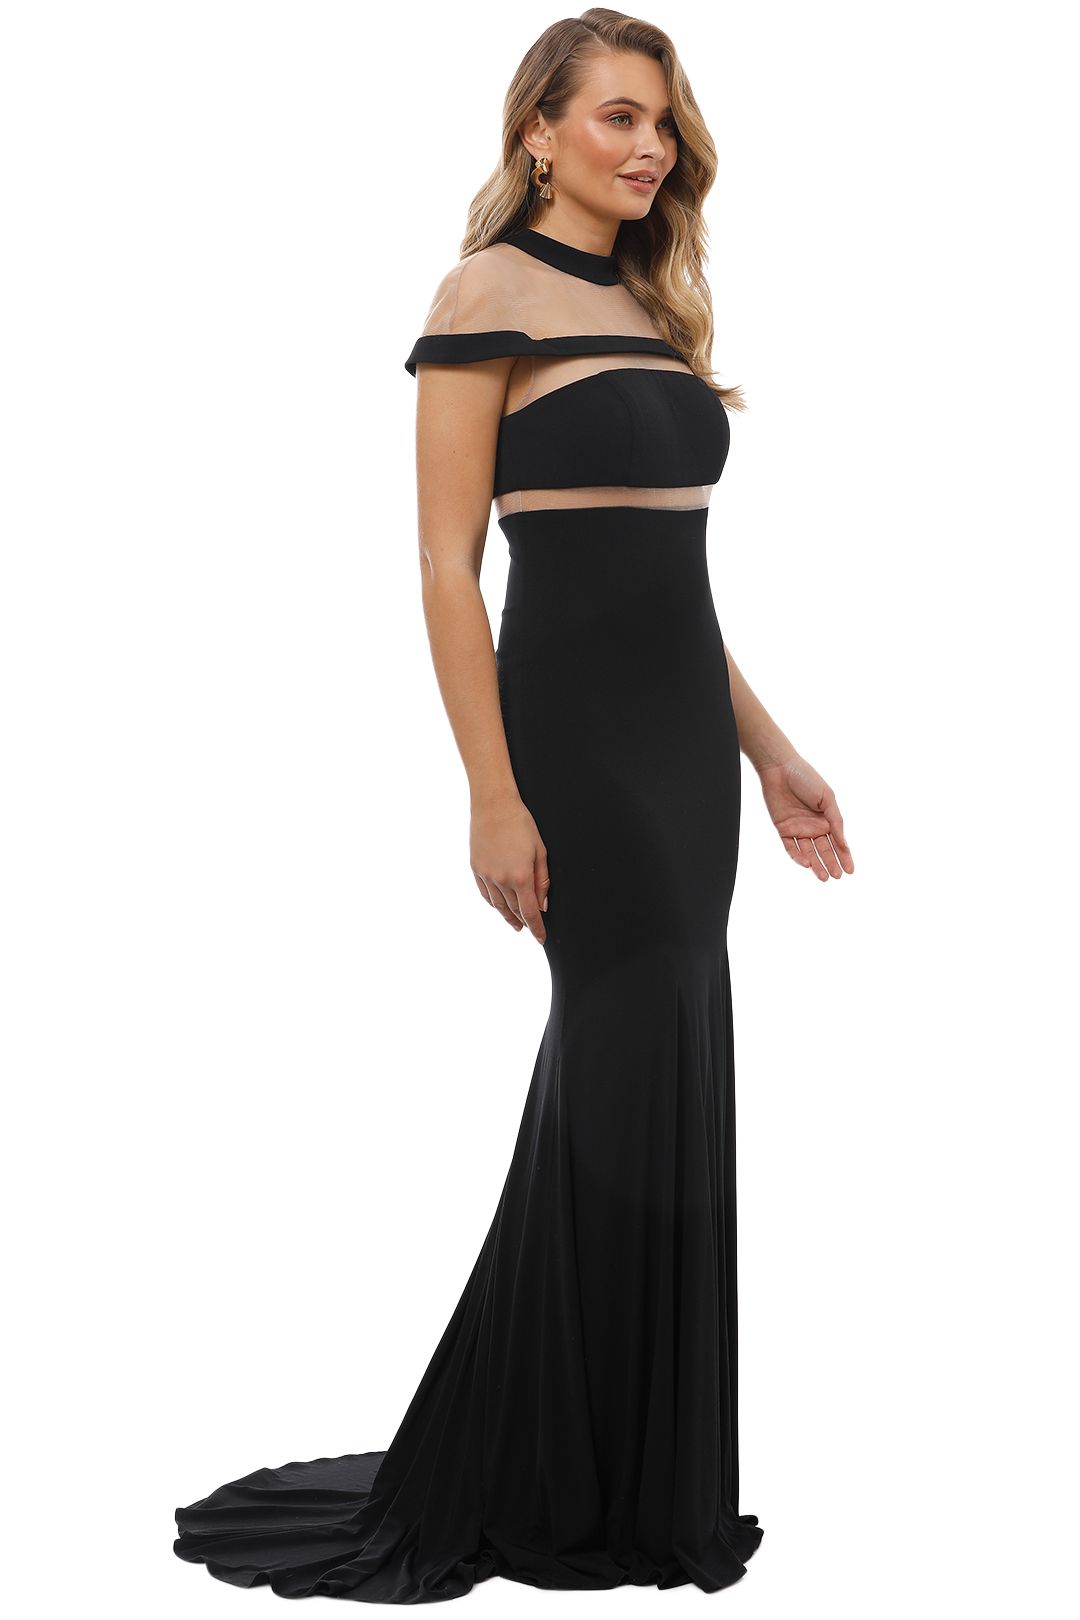 Grace and Hart - Muse Gown - Black - Side